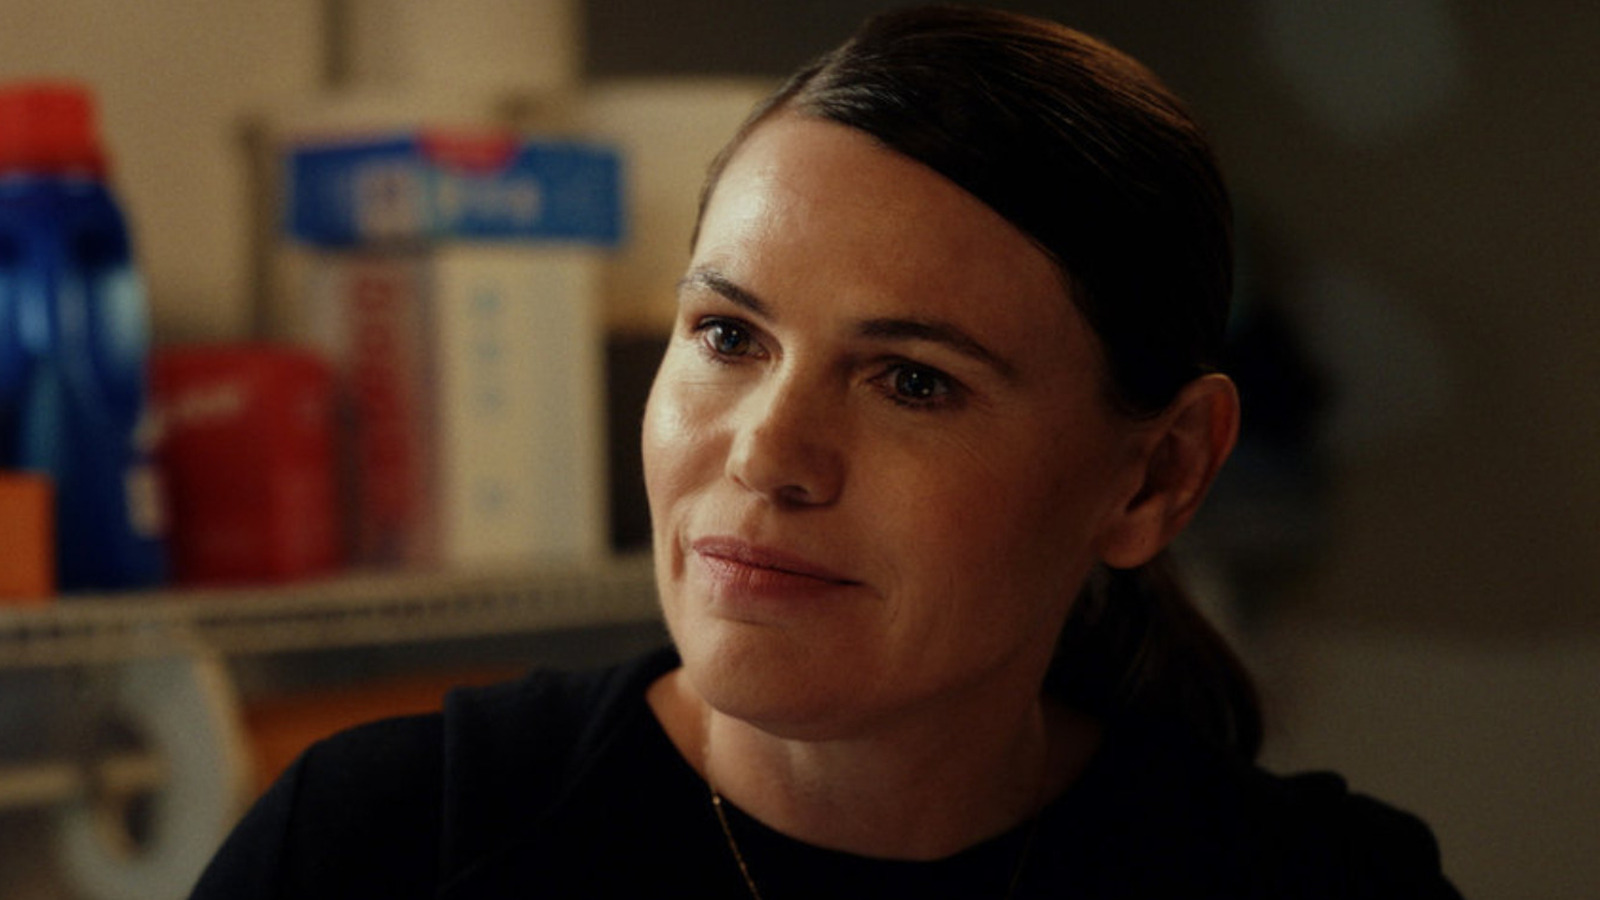 Guest Starring On Poker Face’s Serious Finale Left Clea DuVall With A Skewed Sense Of The Show’s Tone – Looper